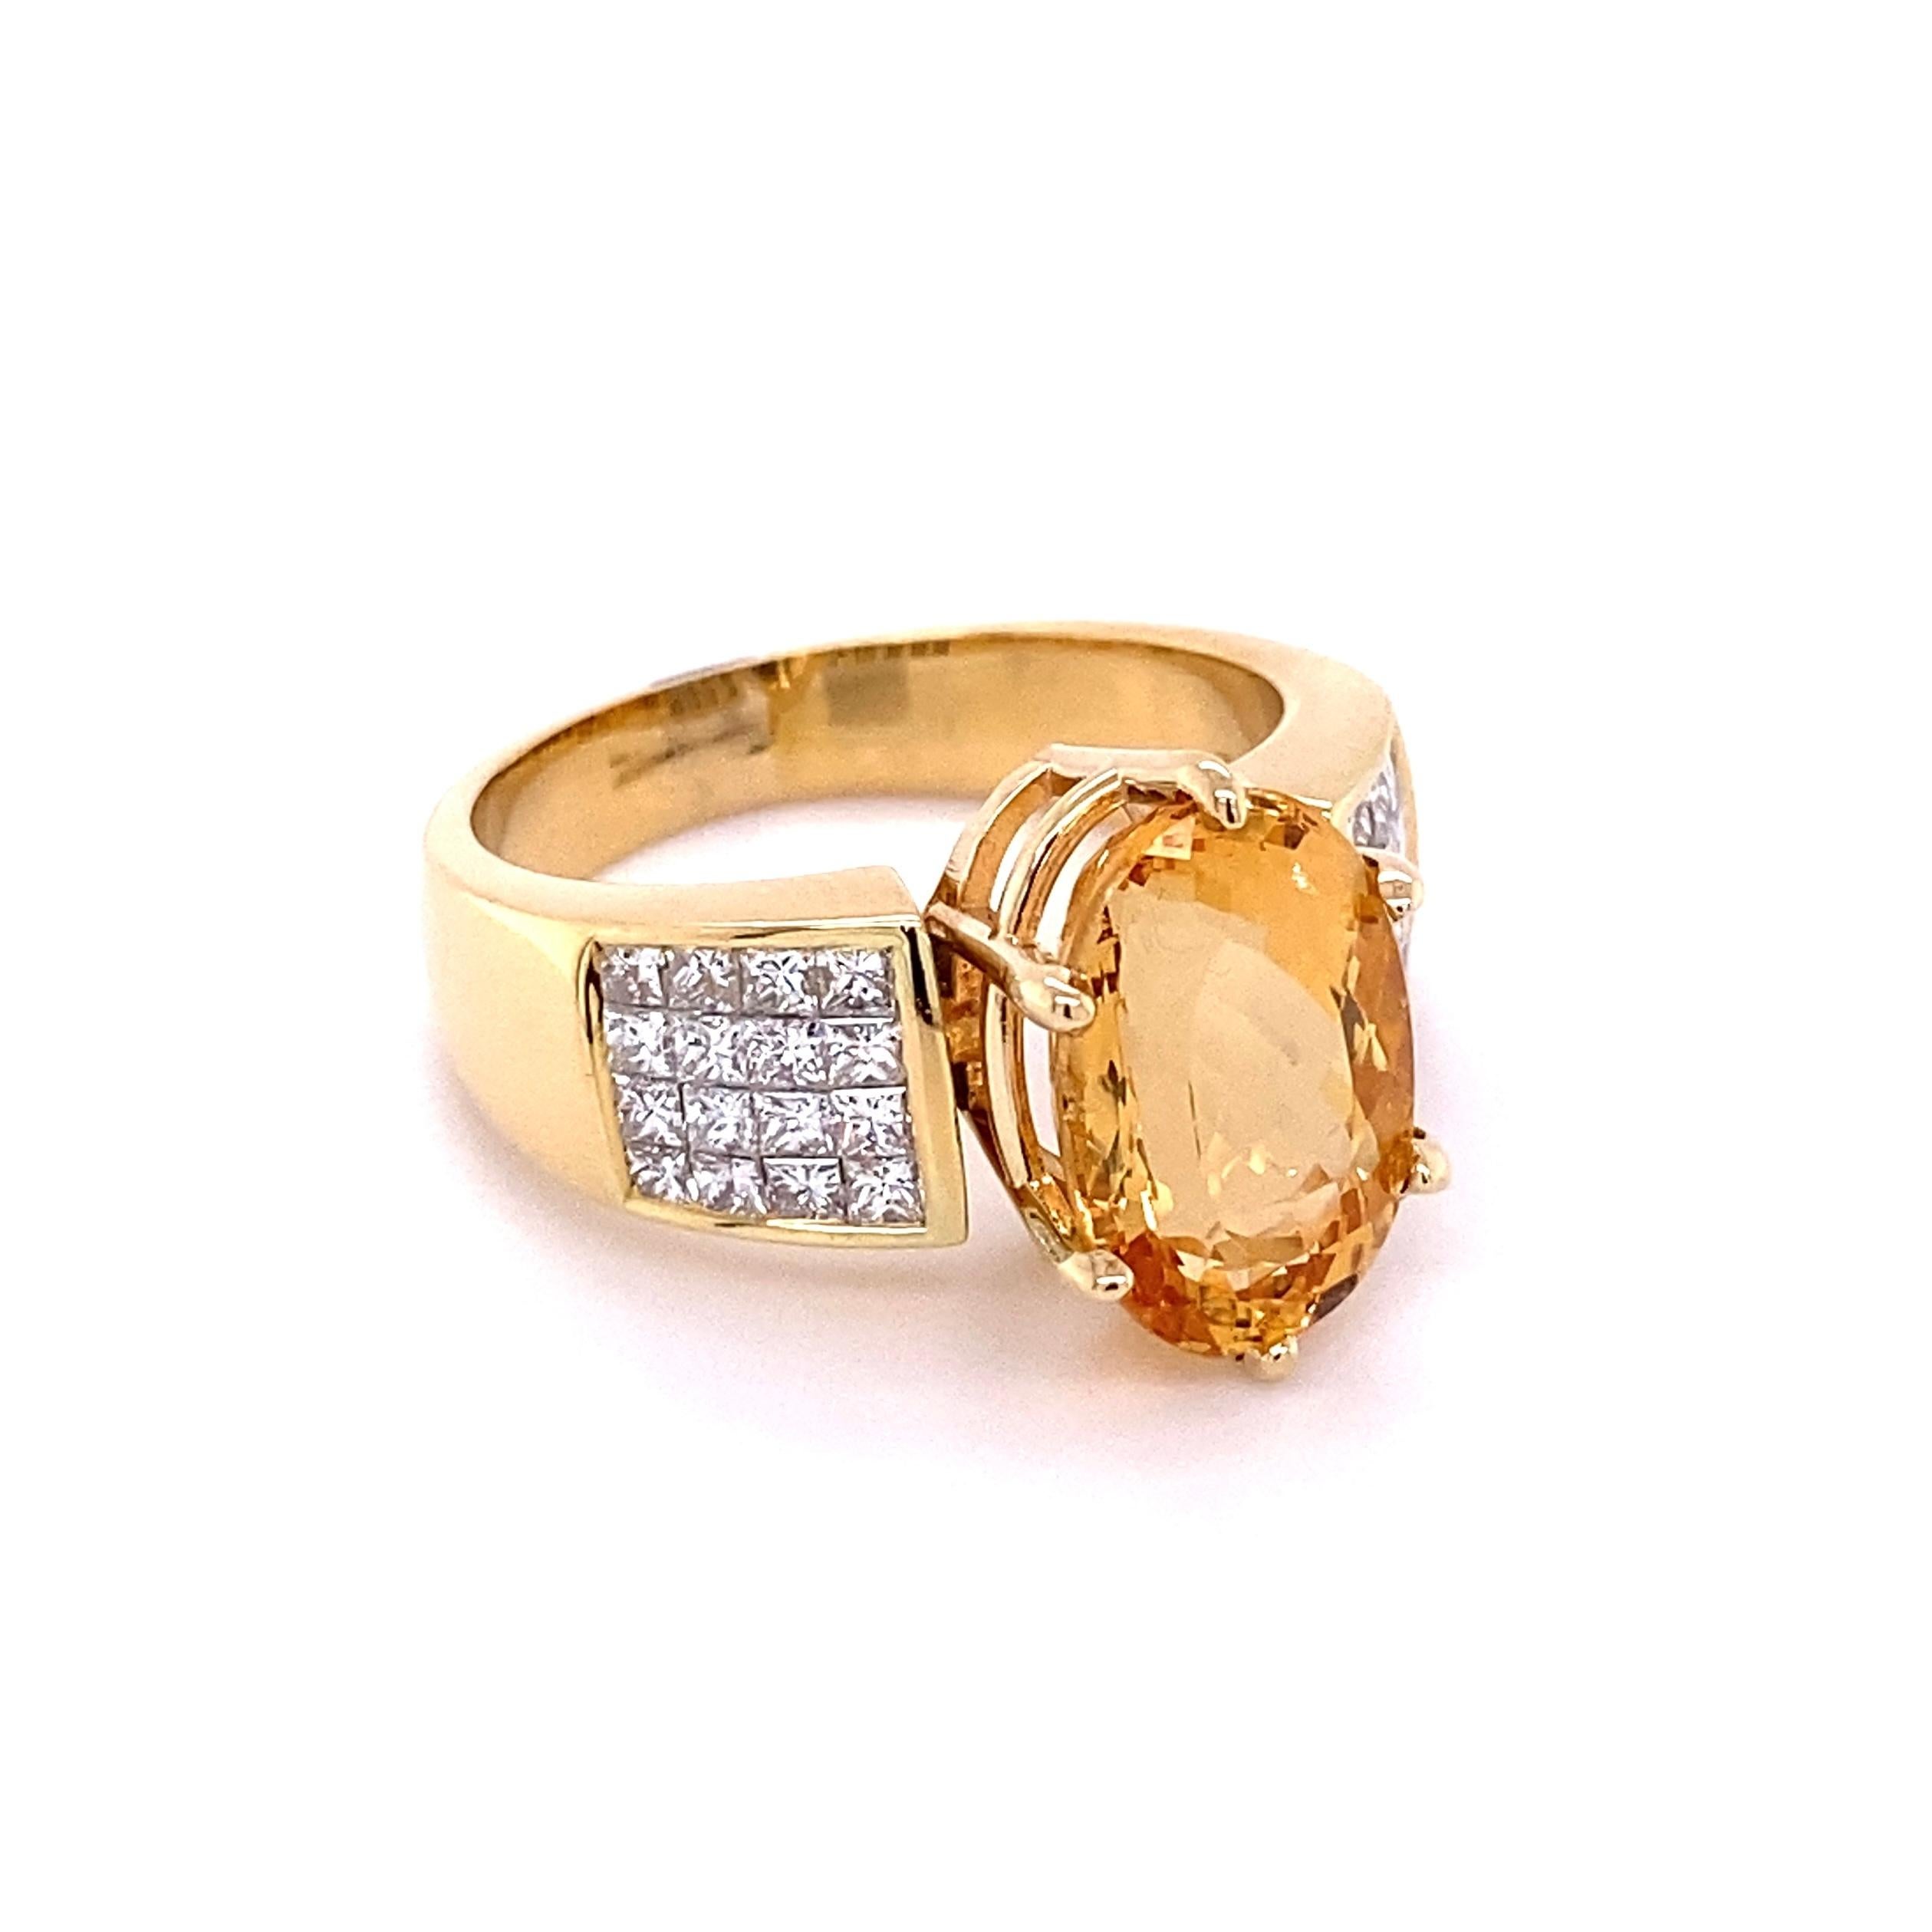 Simply Beautiful! Finely detailed Imperial Topaz and Diamond Platinum Cocktail Ring. Centering a securely nestled Hand set Oval Imperial Topaz, weighing approx. 7.52 Carat, either side with Diamonds, approx. 1.55tcw. Hand crafted 18K Yellow Gold